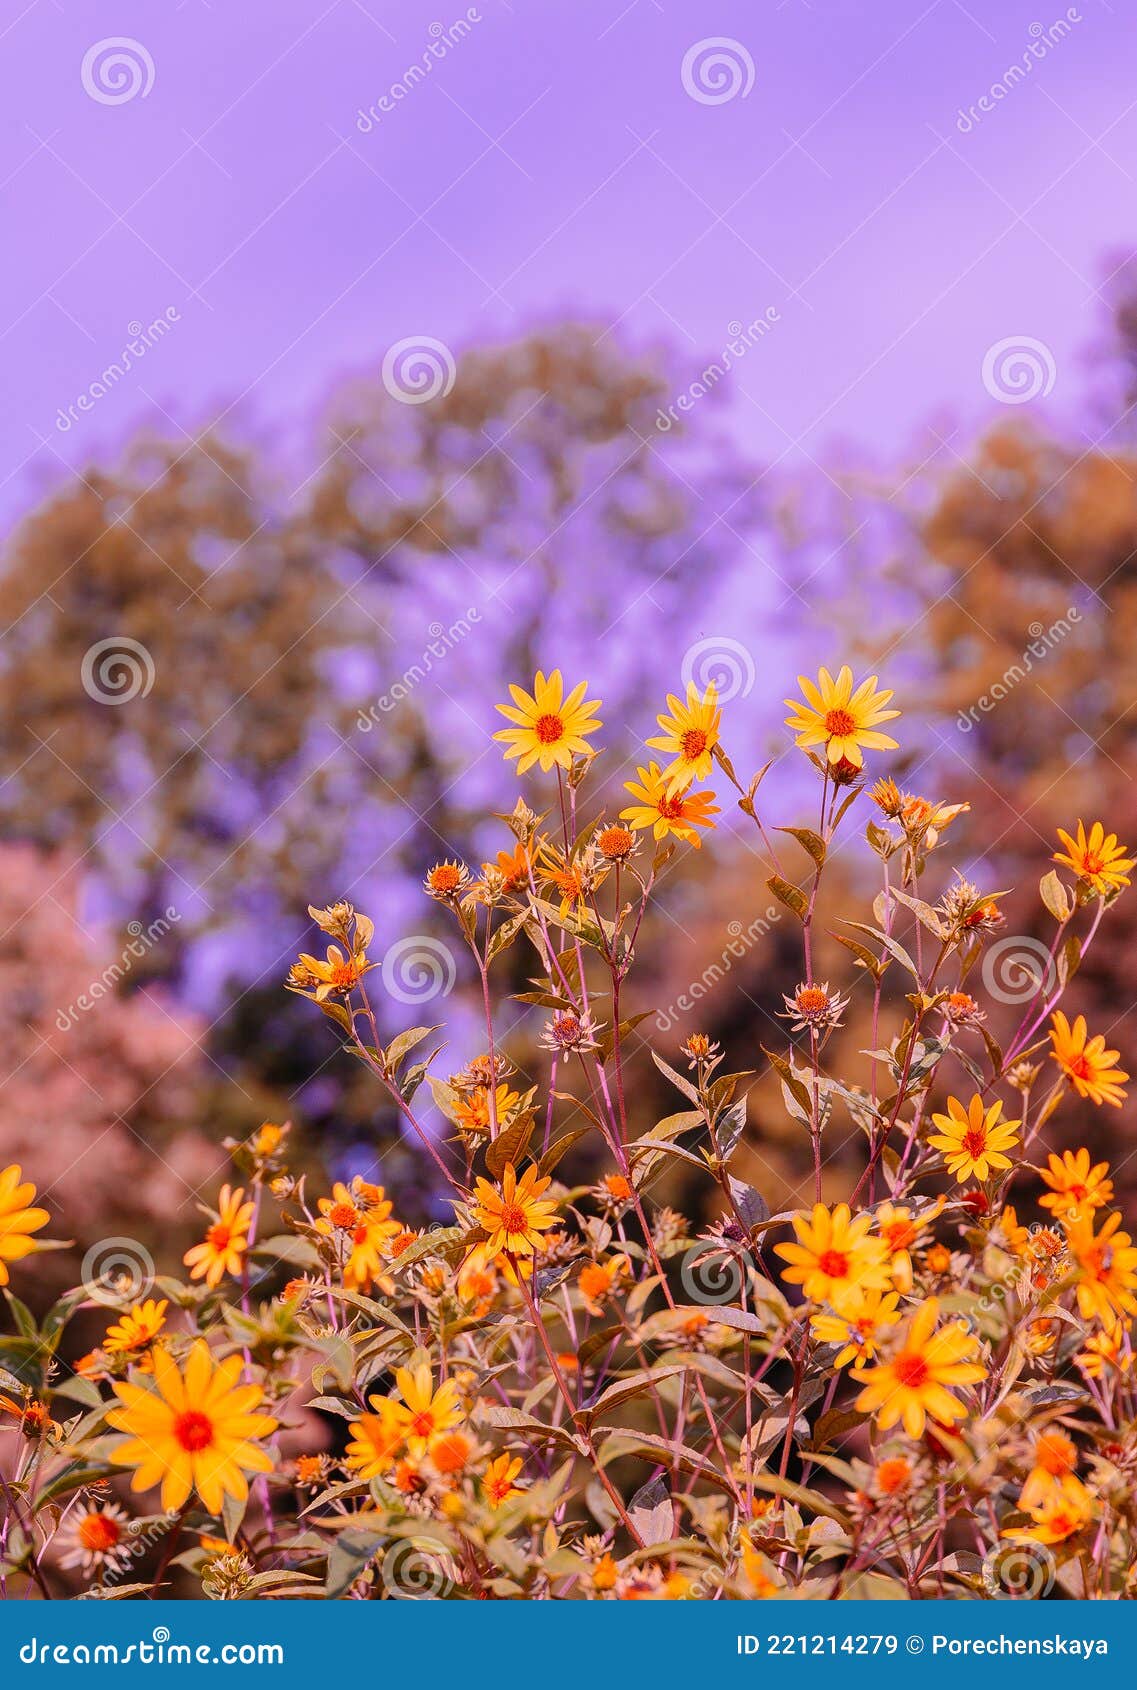 Bio Eco Nature Plant Lover Concept Background. Yellow Flowers Field.  Stylish Vertical Wallpaper. Travel Slovenia Stock Image - Image of natural,  garden: 221214279